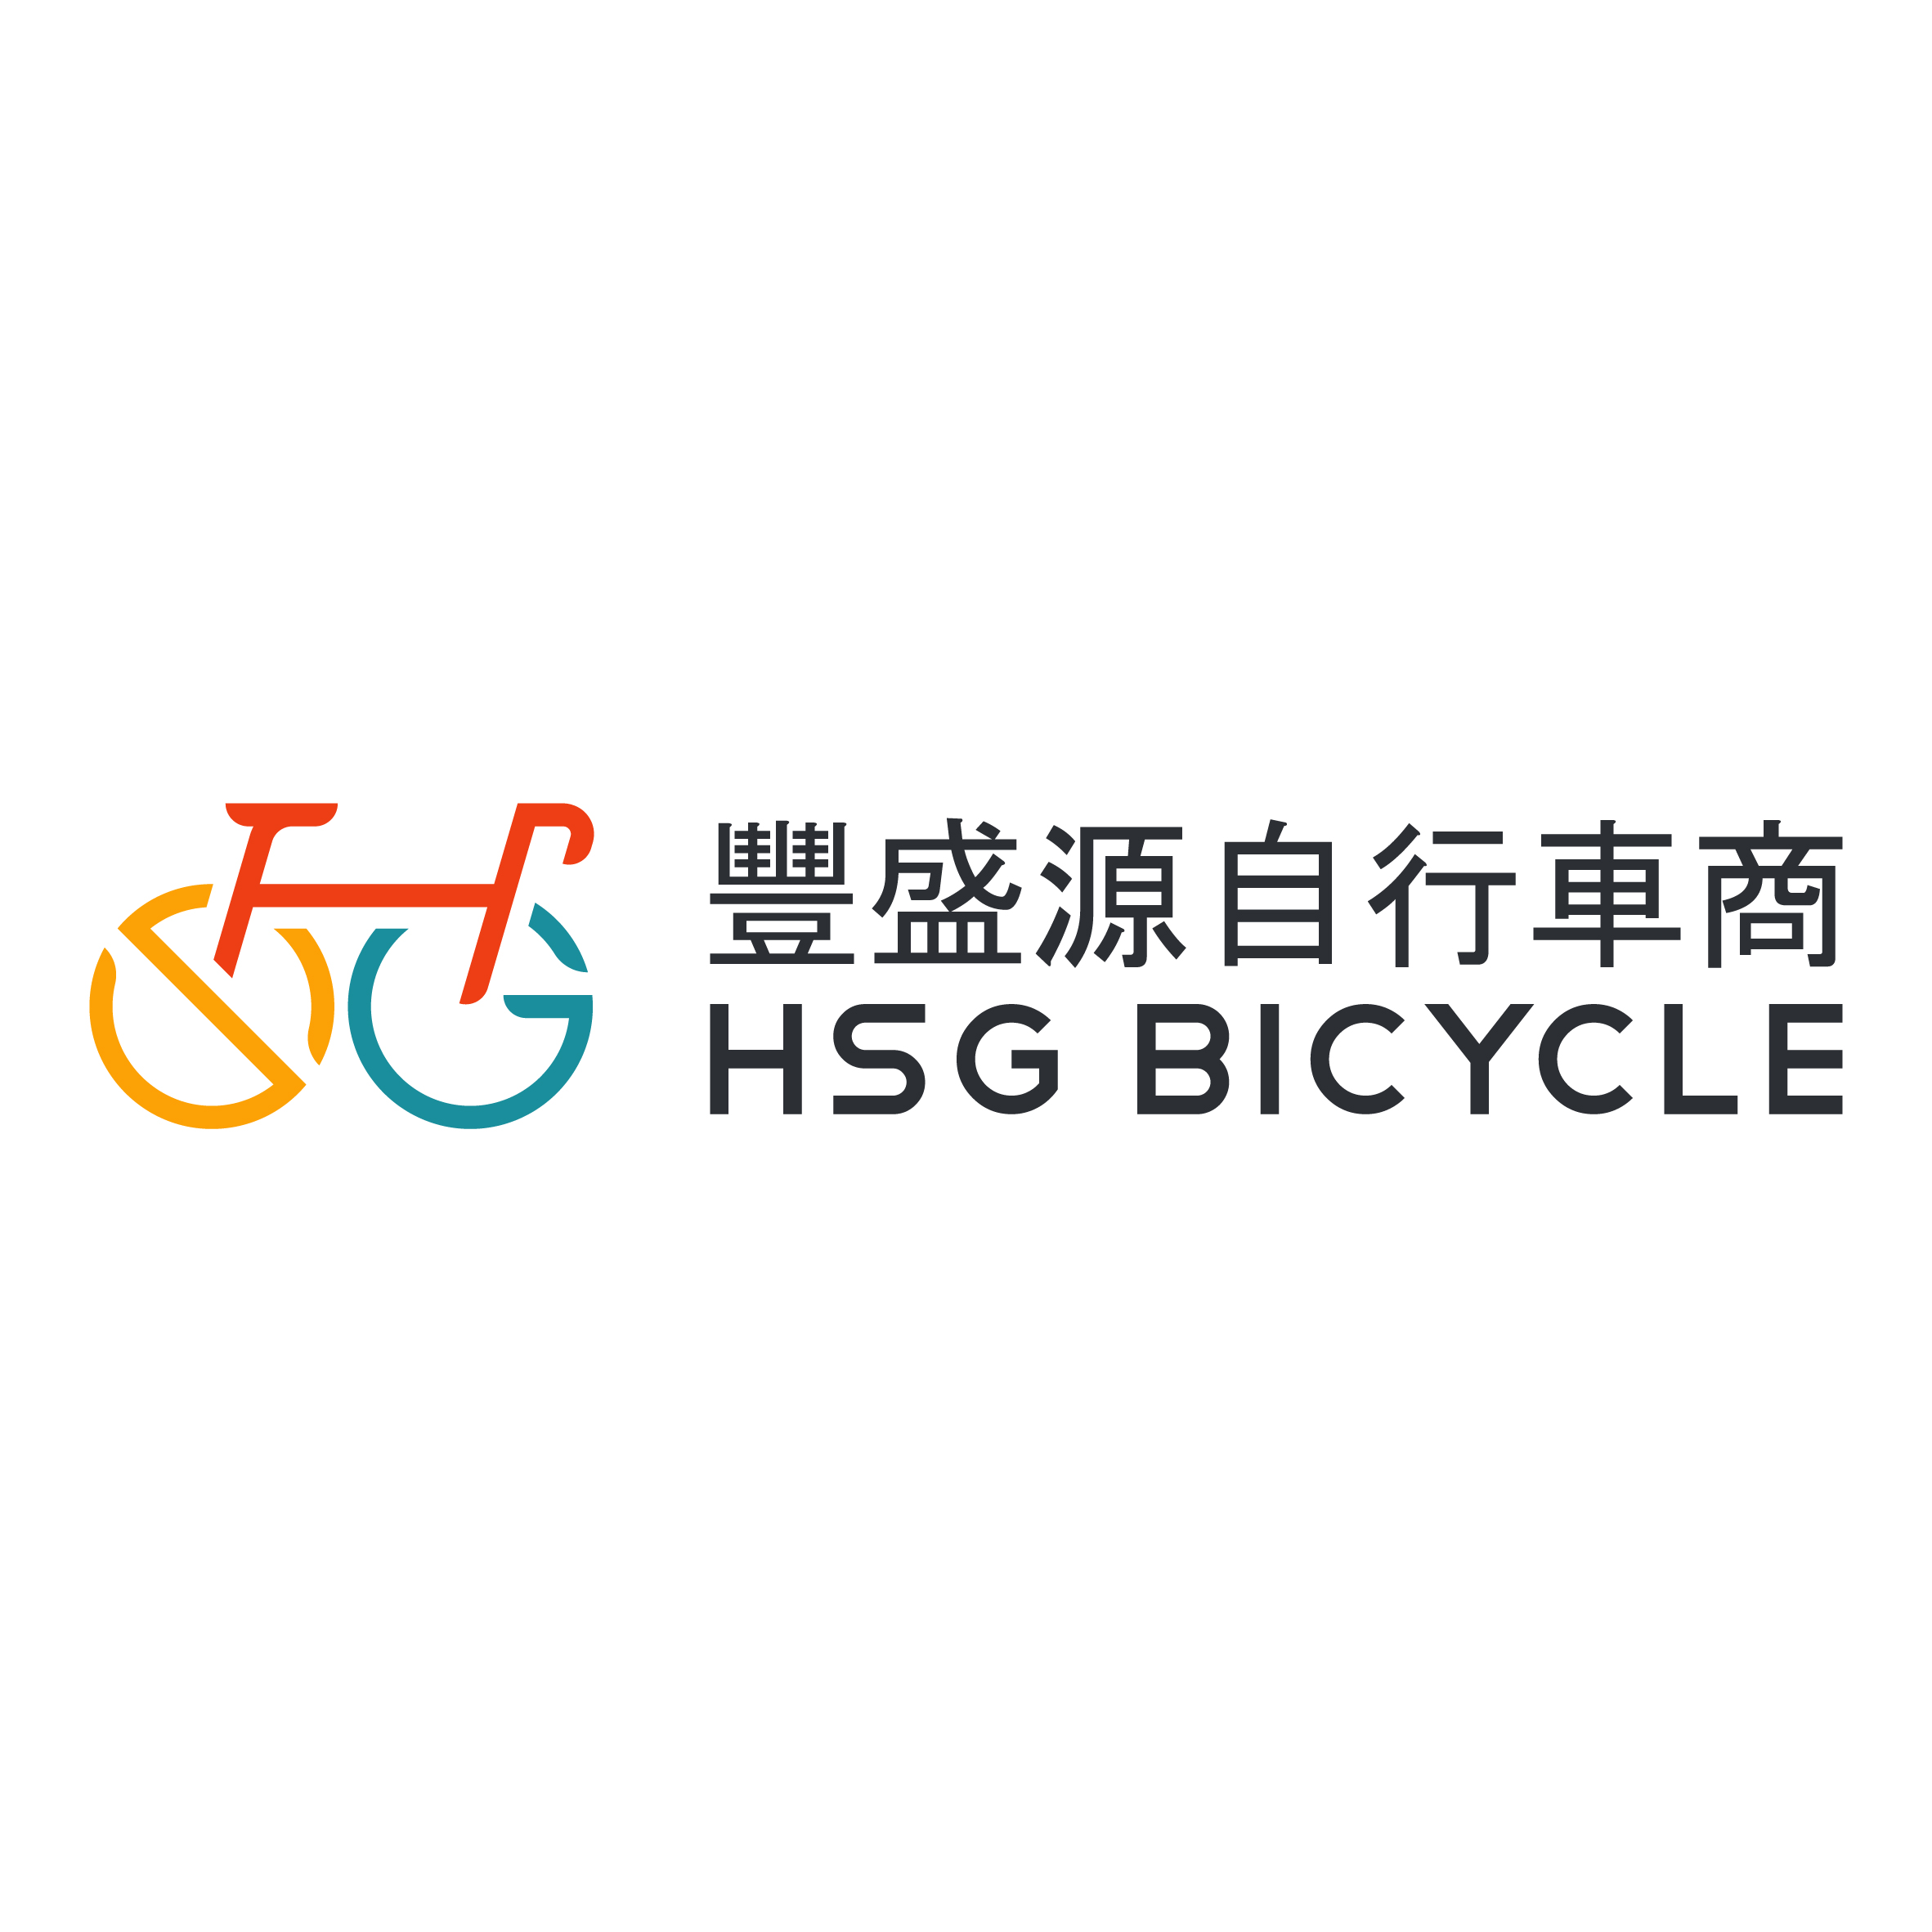 HSG Bicycle